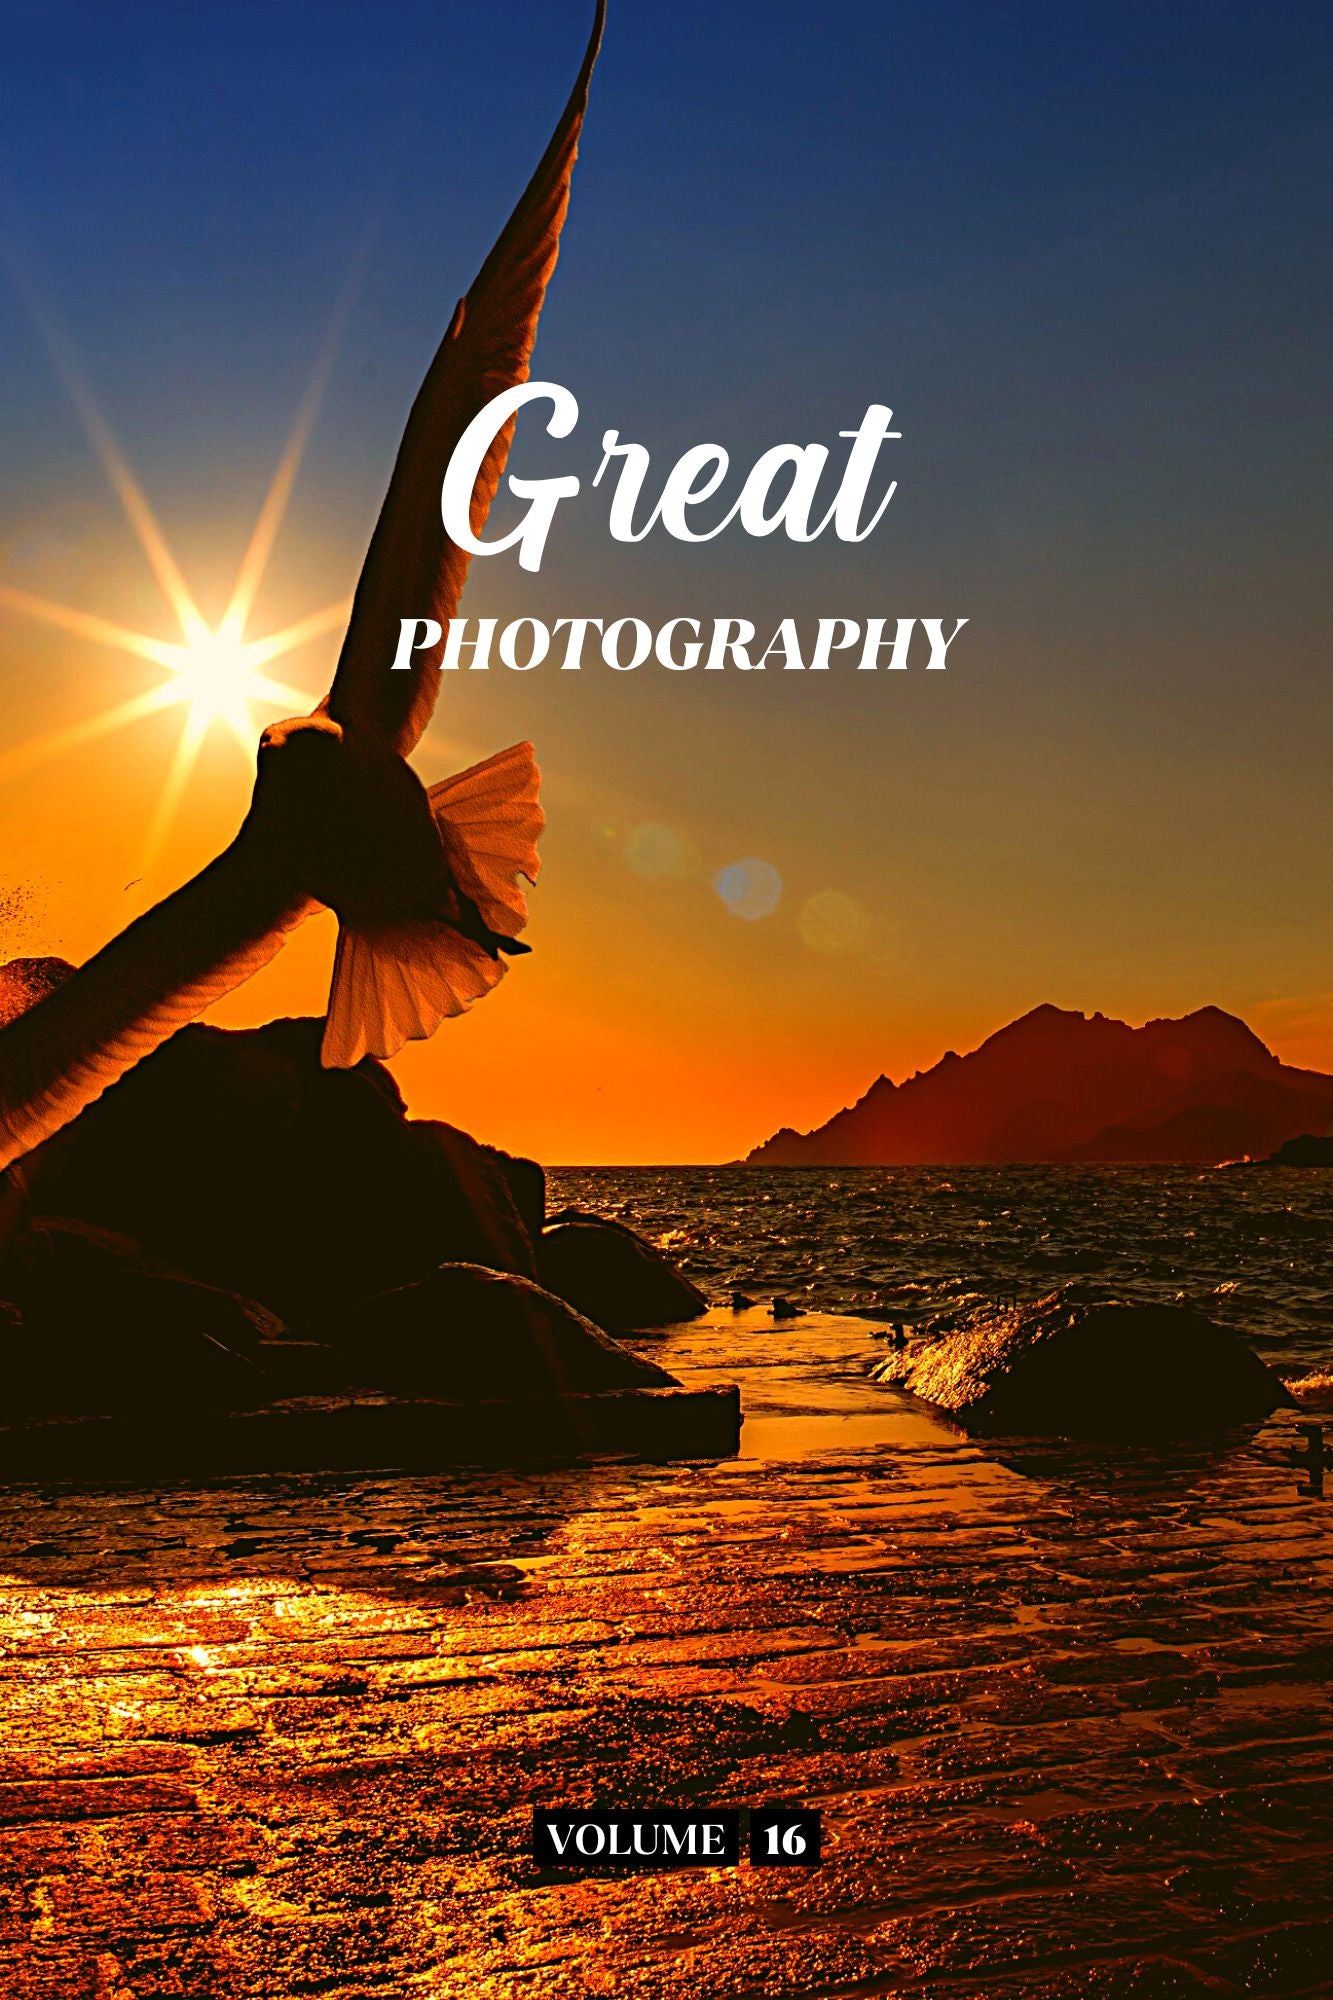 Great Photography Volume 16 (Physical Book Pre-Order)